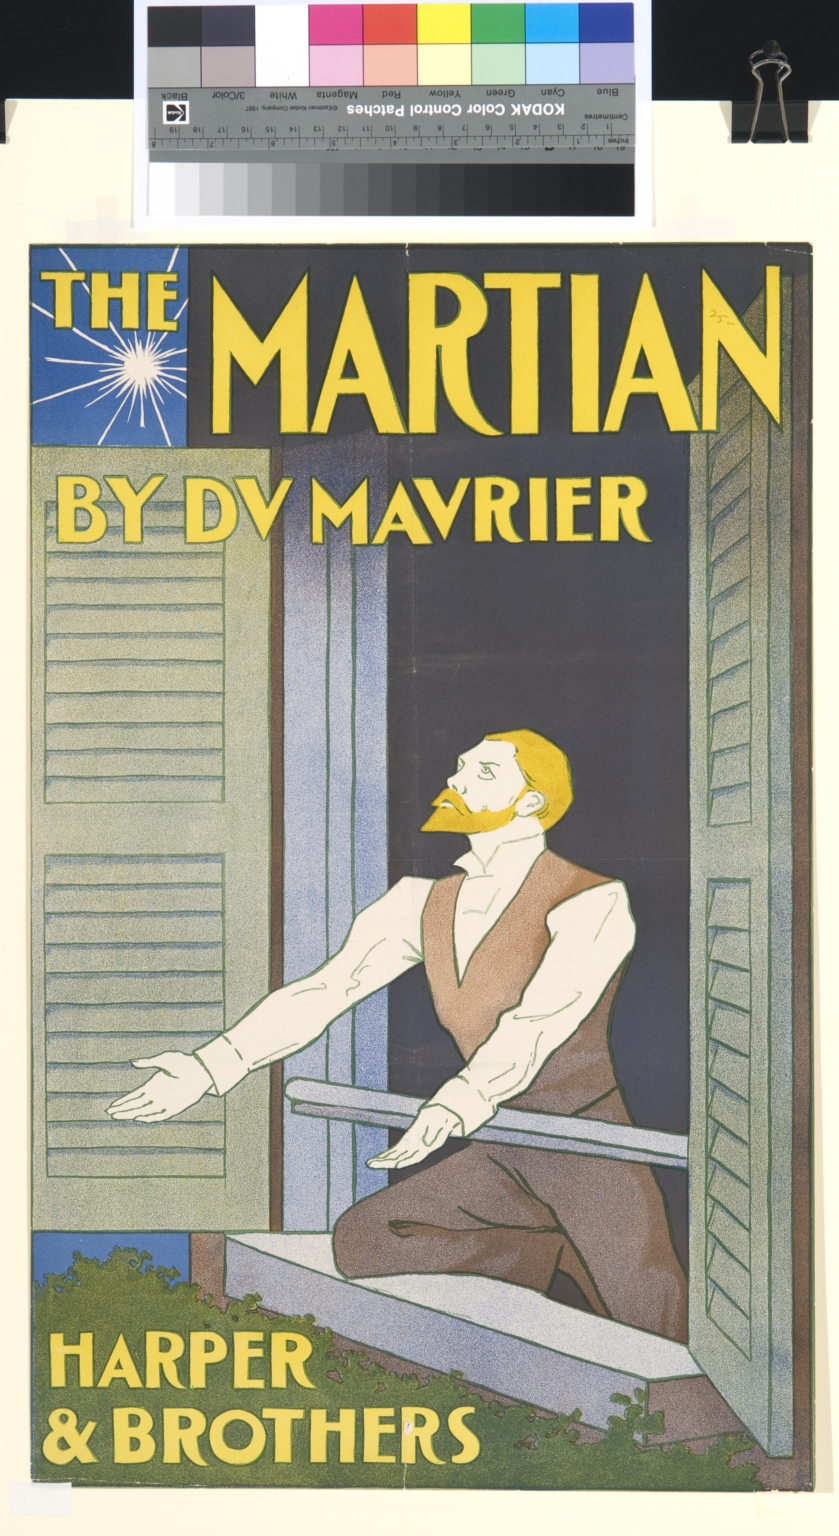 The martian : by Du Maurier